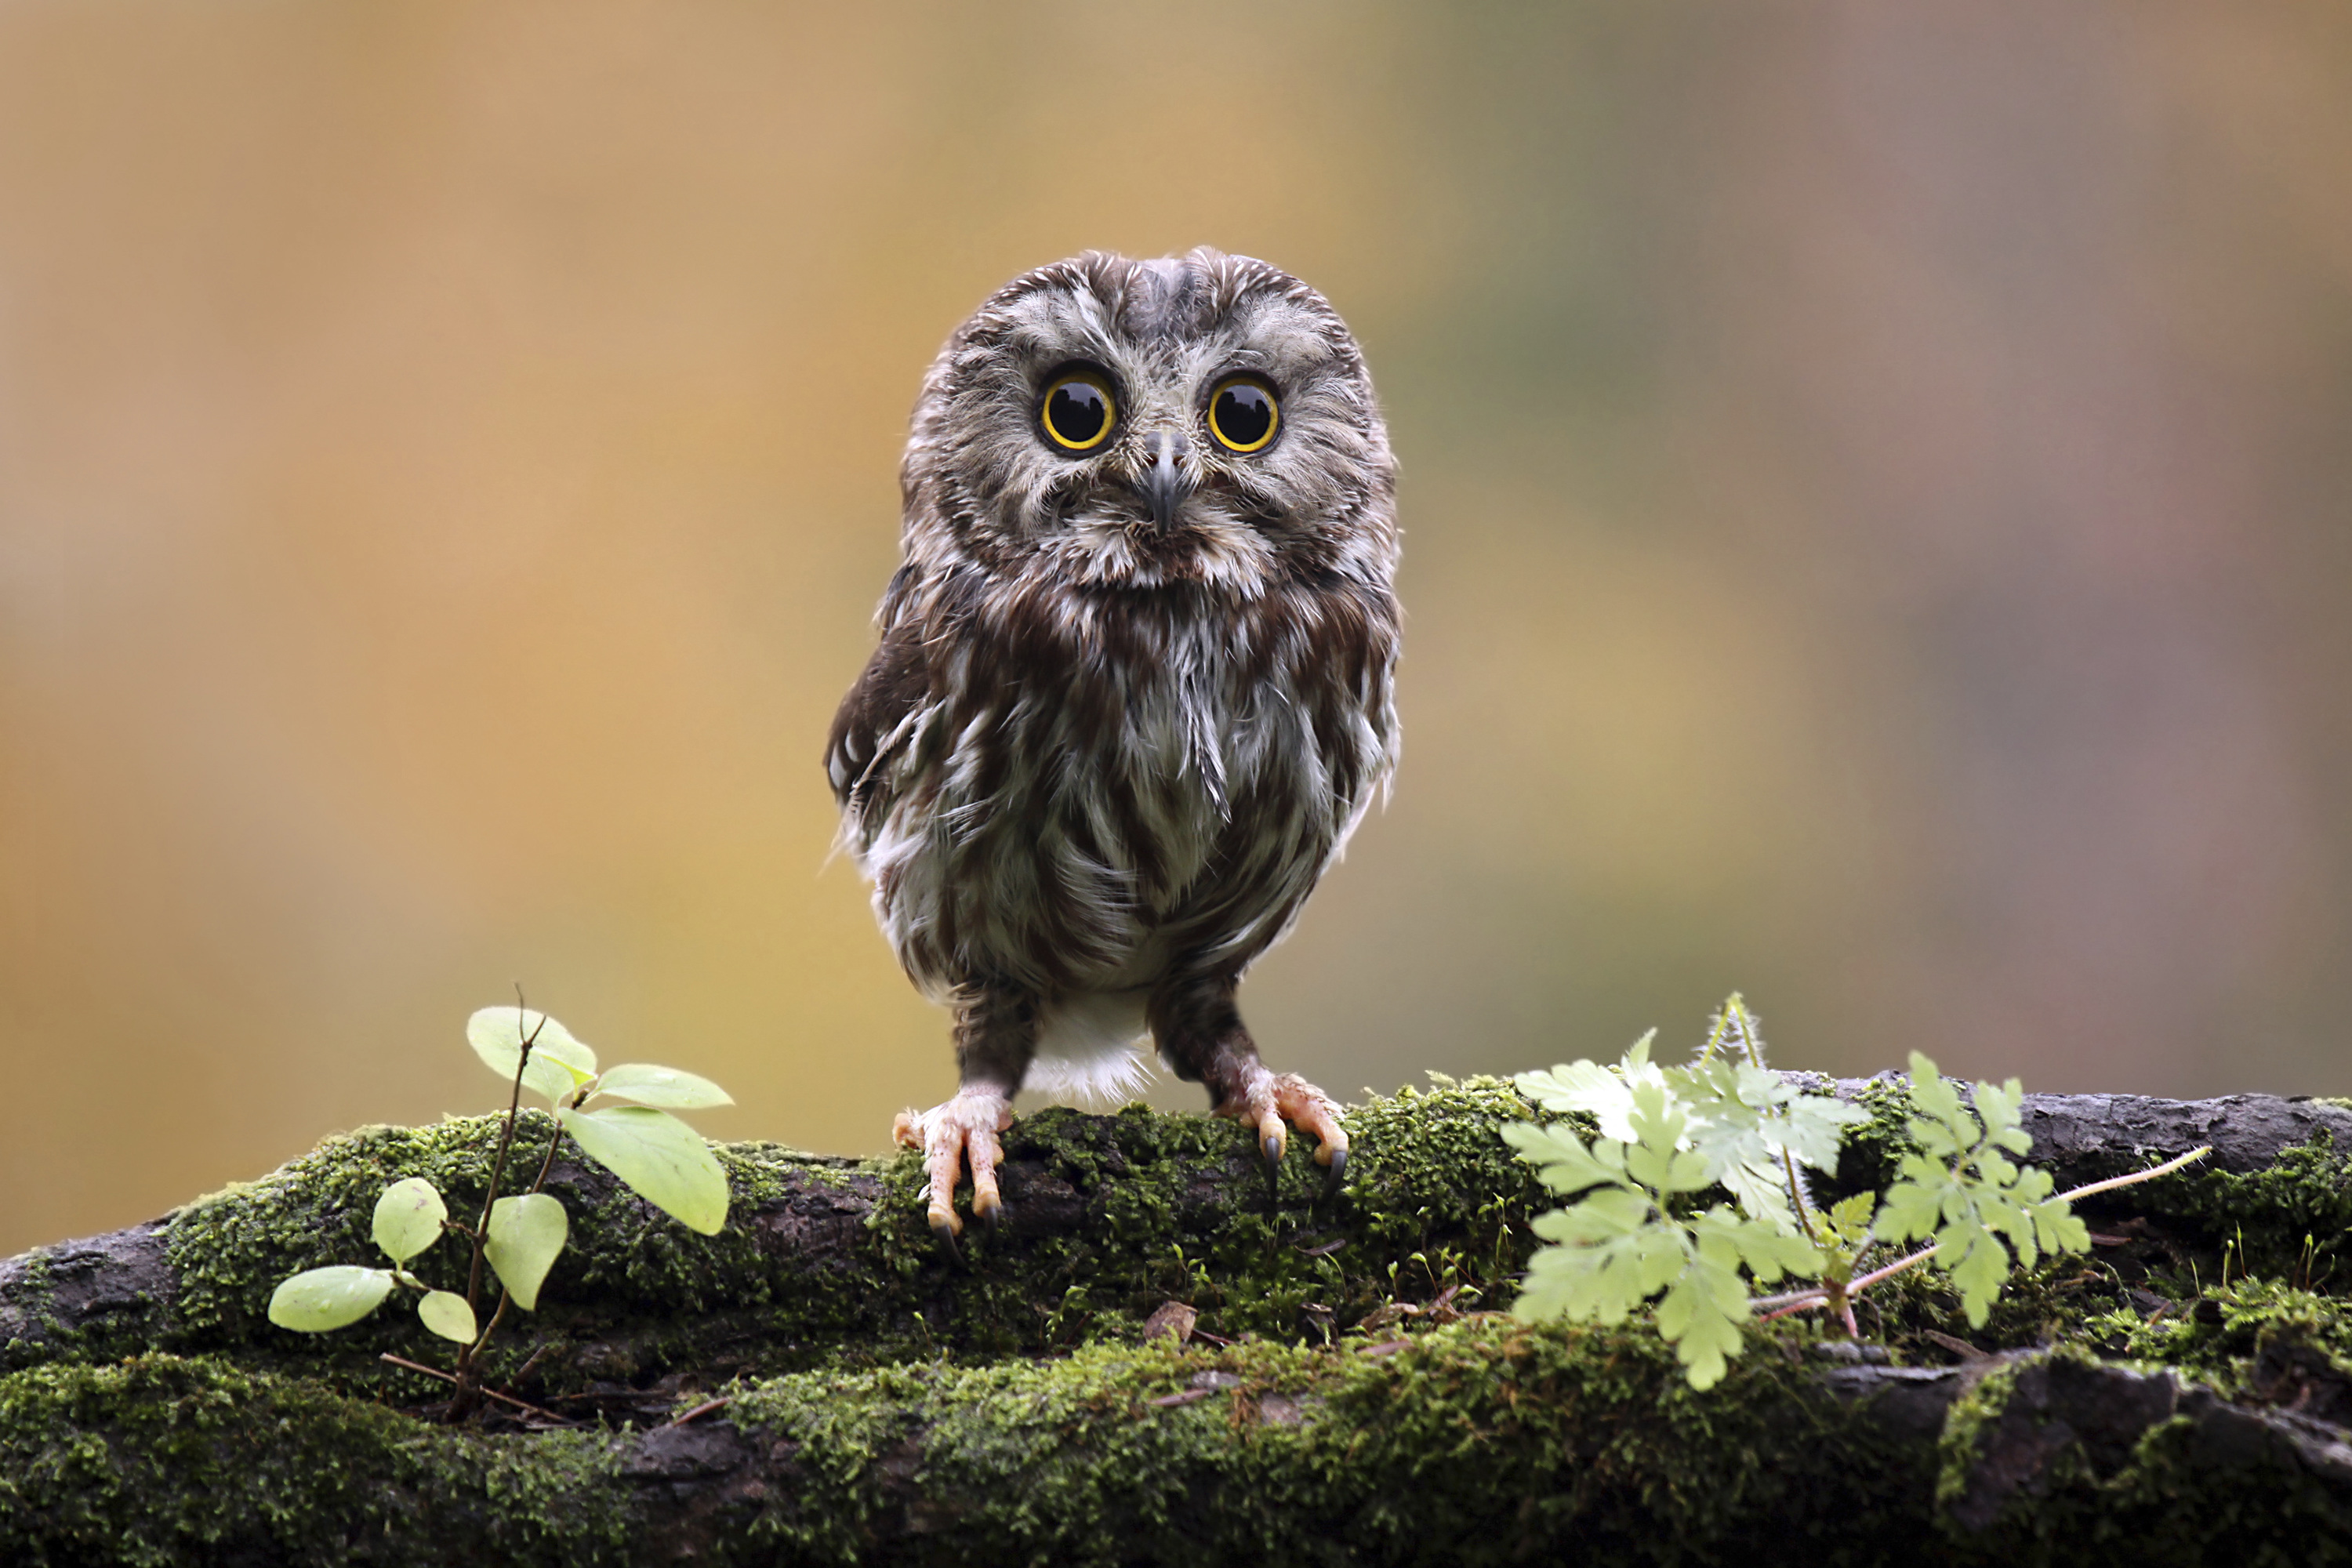 A small owl with brown and white mottled feathers stands on a branch staring at the camera.